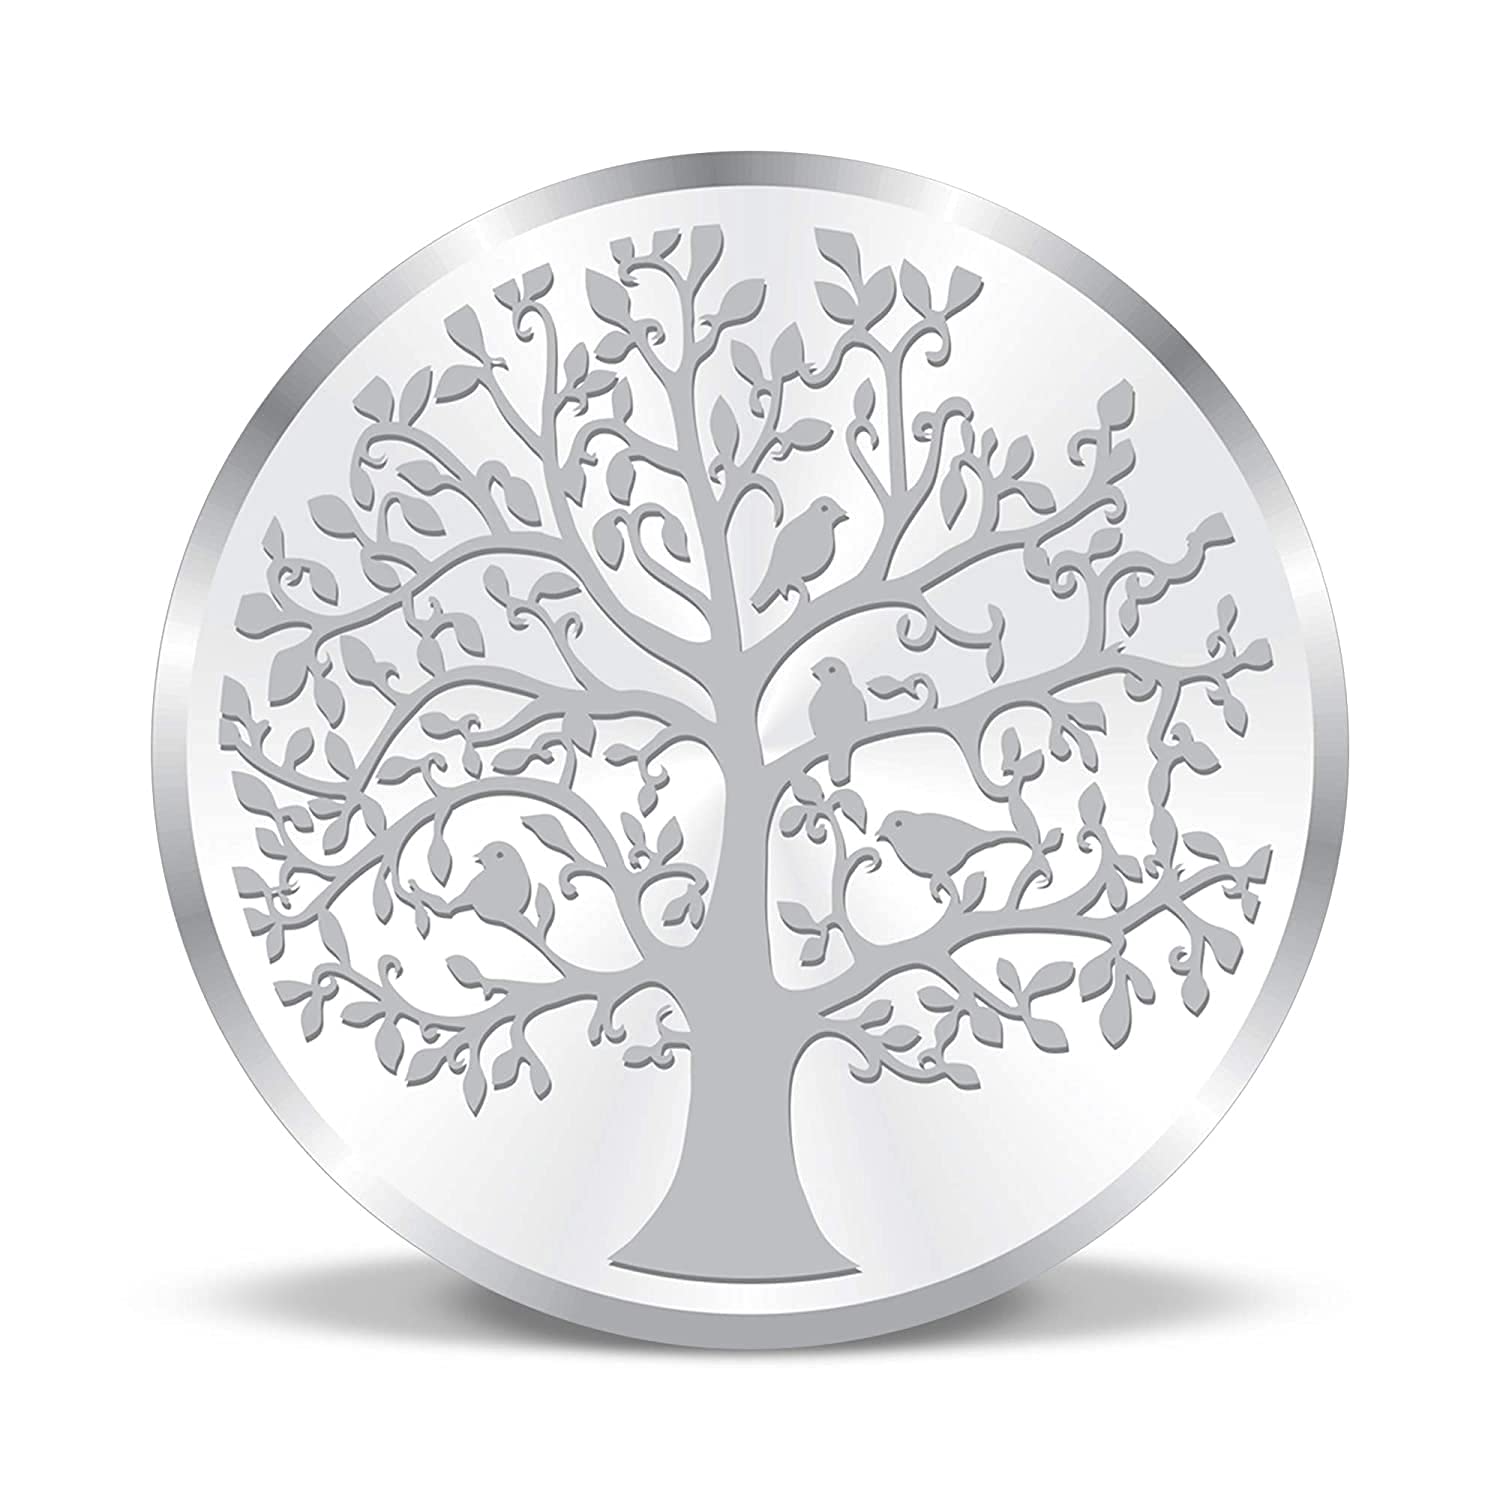 BLISSE ALLURE 999 BANYAN TREE SILVER COIN 50 GM